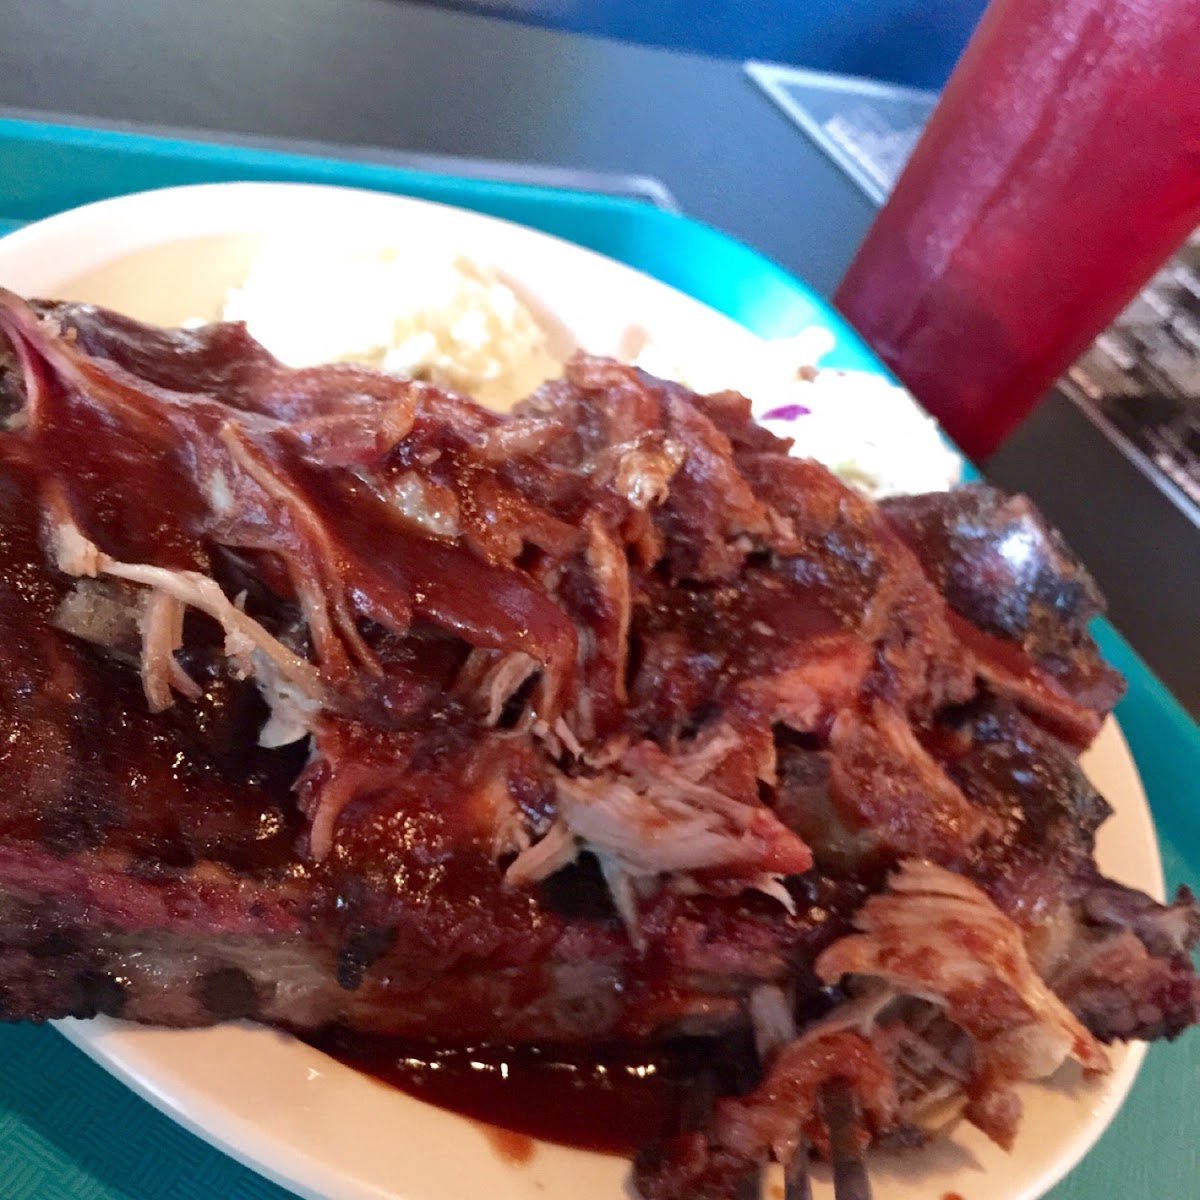 Pulled pork and beef ribs!!!